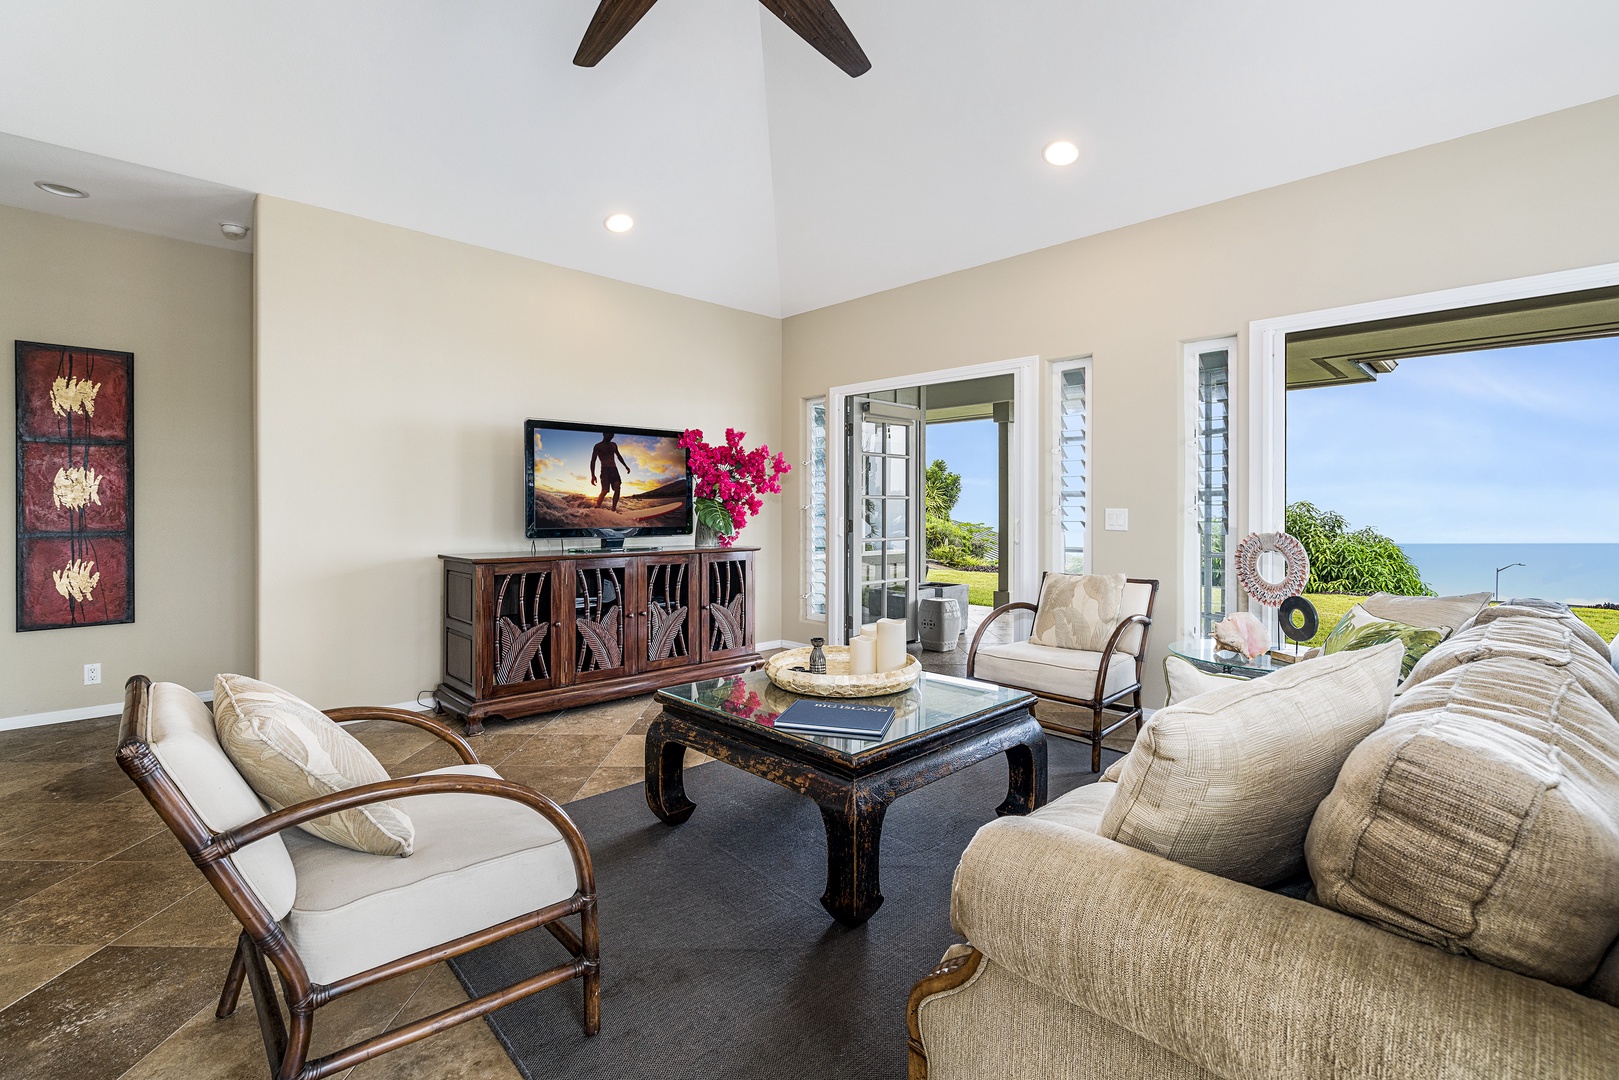 Kailua Kona Vacation Rentals, Sunset Hale - Relax with your favorite show!